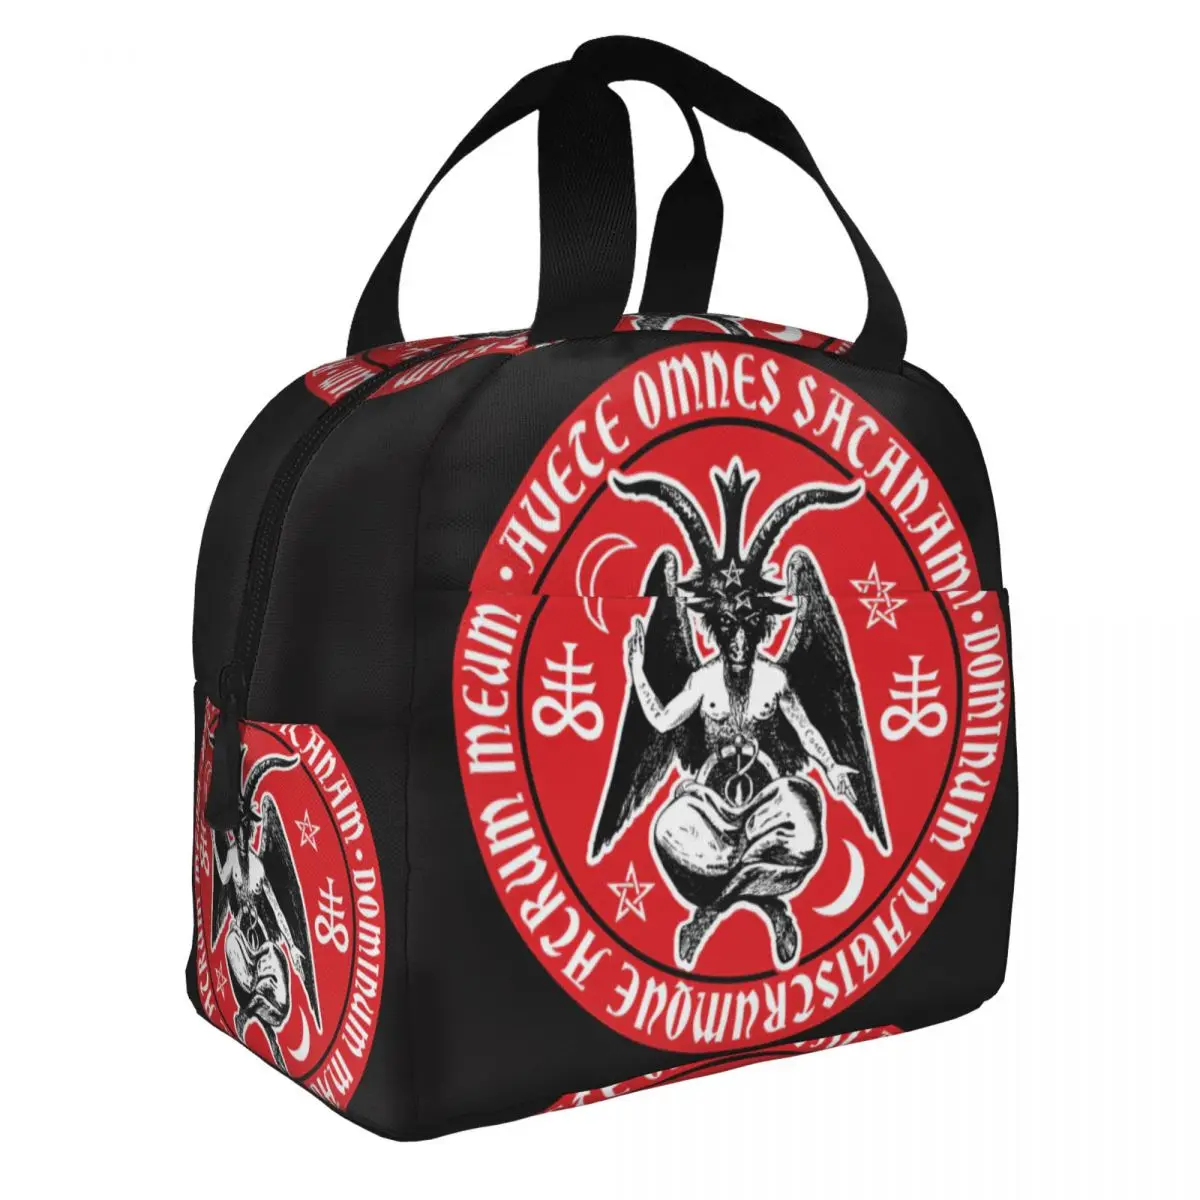 Baphomet Satanic Crosses With Hail  Lunch Bento Bags Portable Aluminum Foil thickened Thermal Cloth Lunch Bag for Women Men Boy